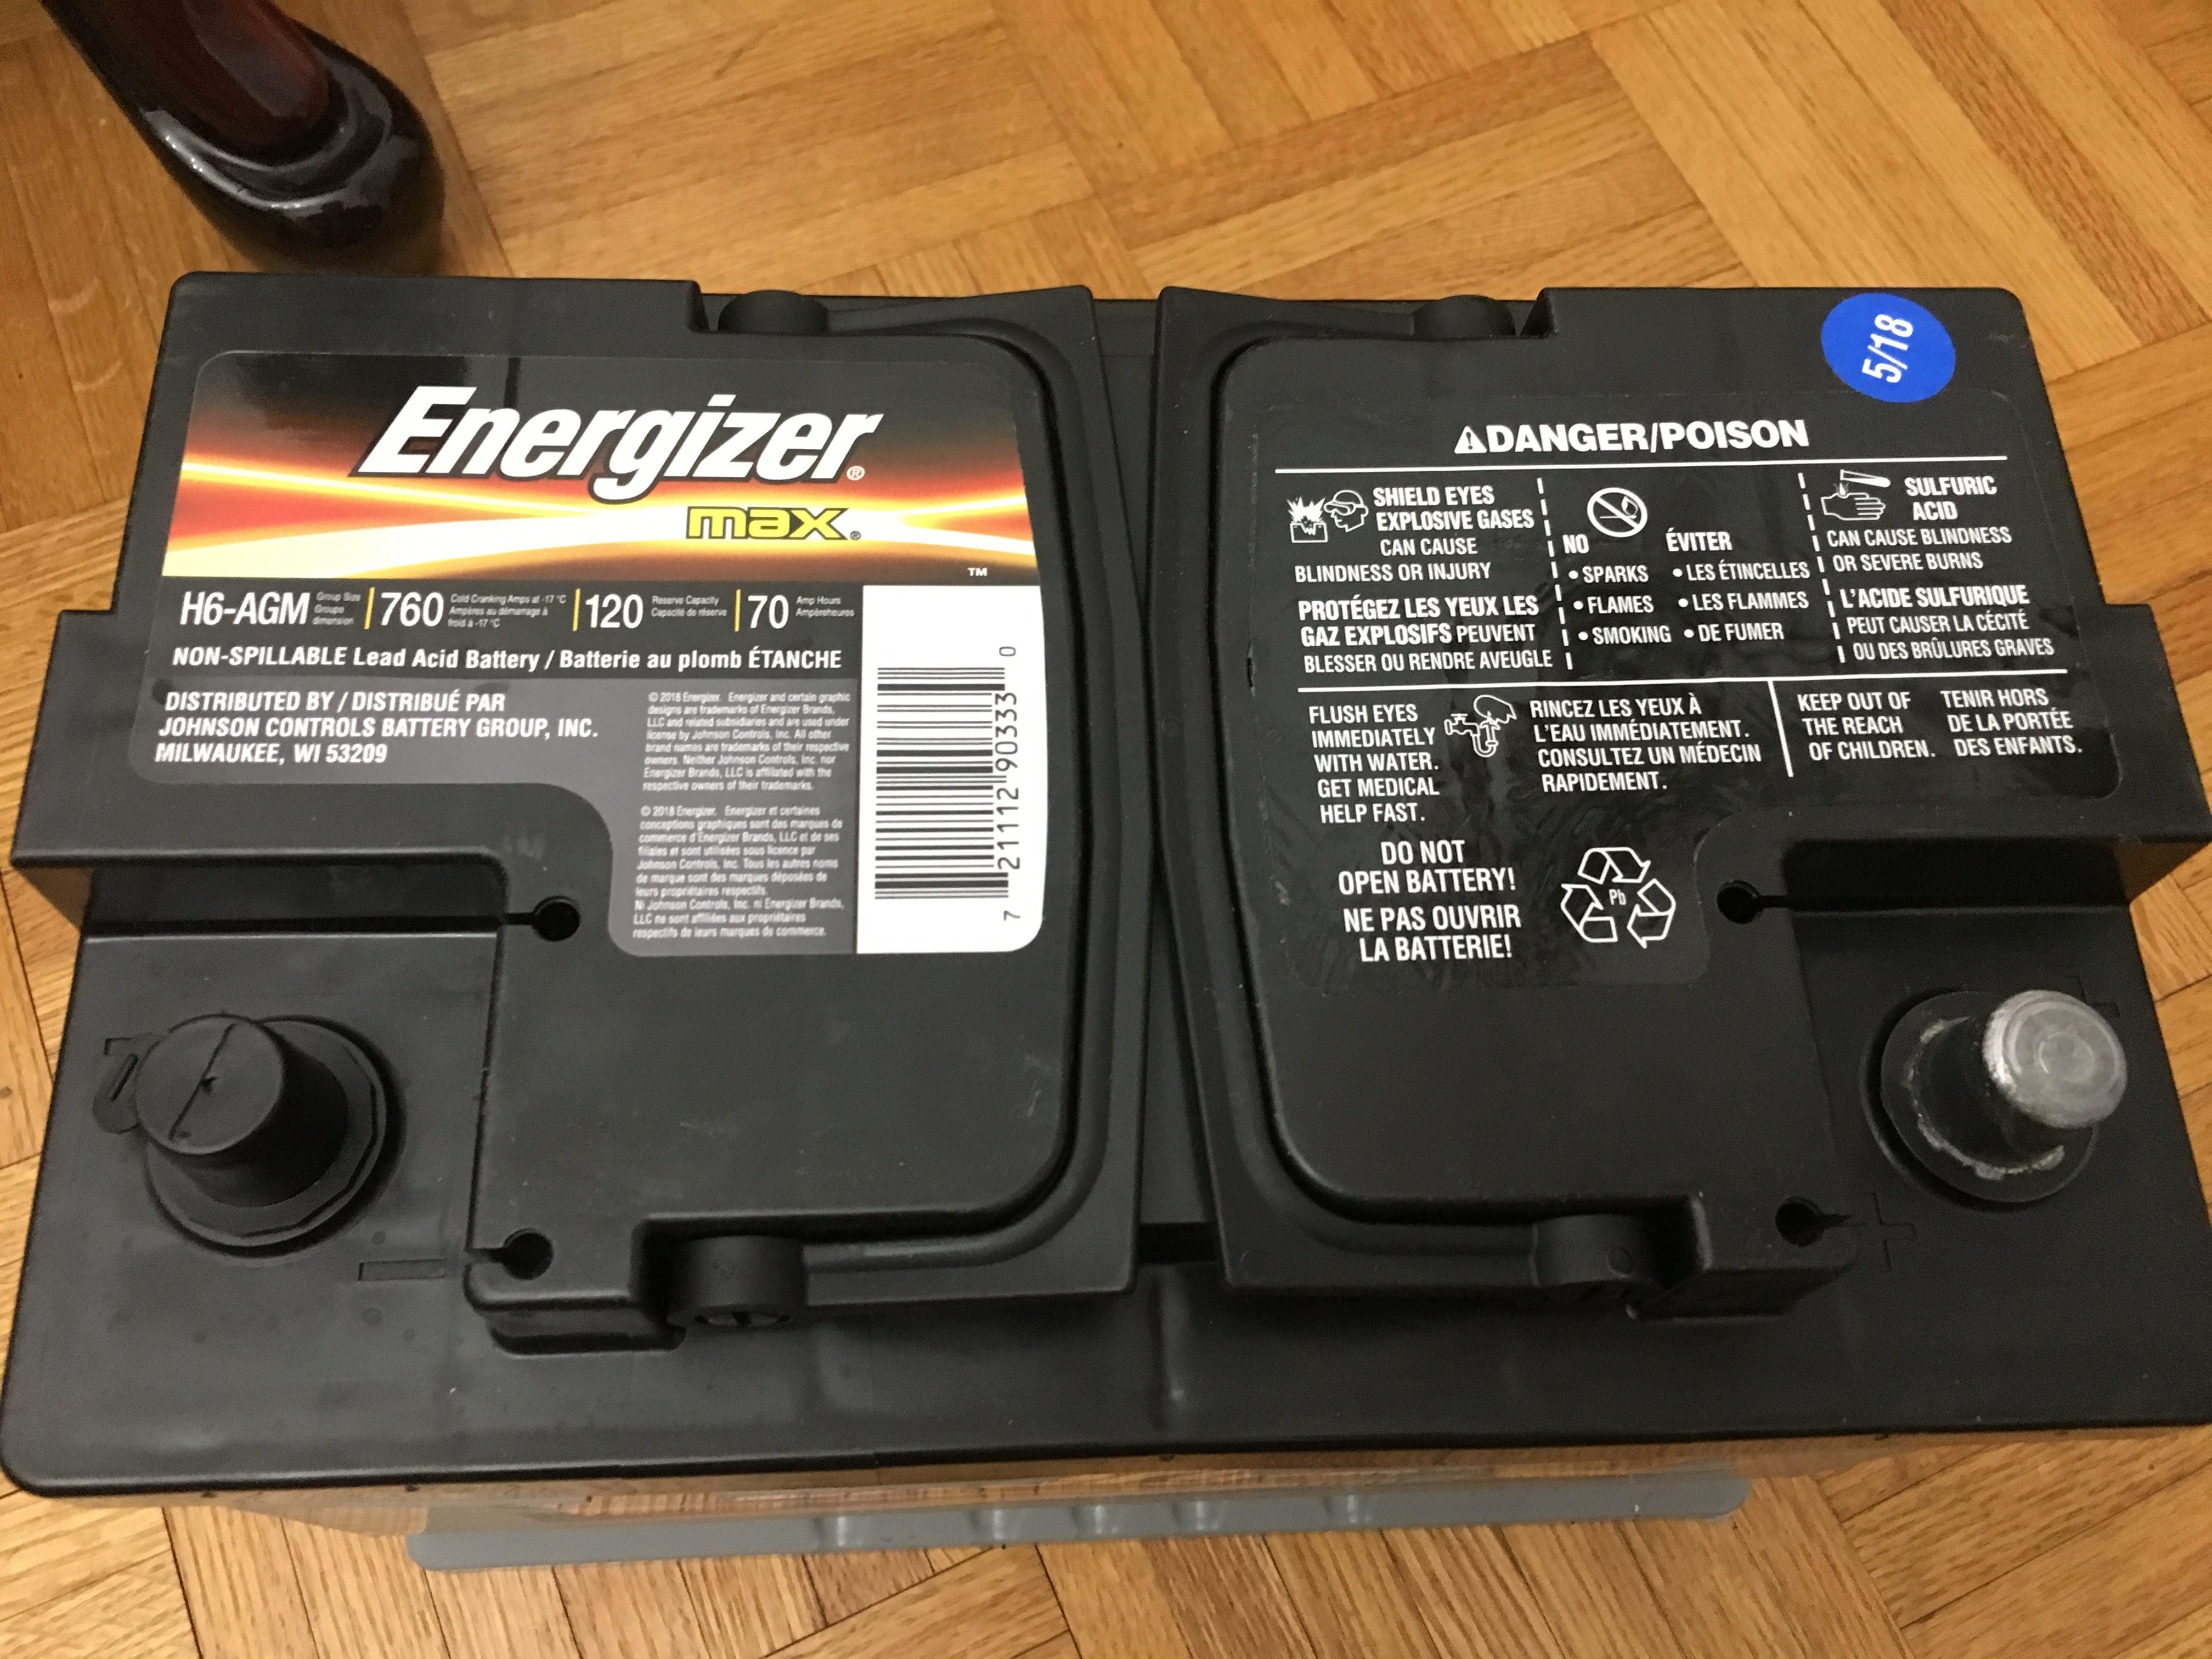 costco battery prices for cars